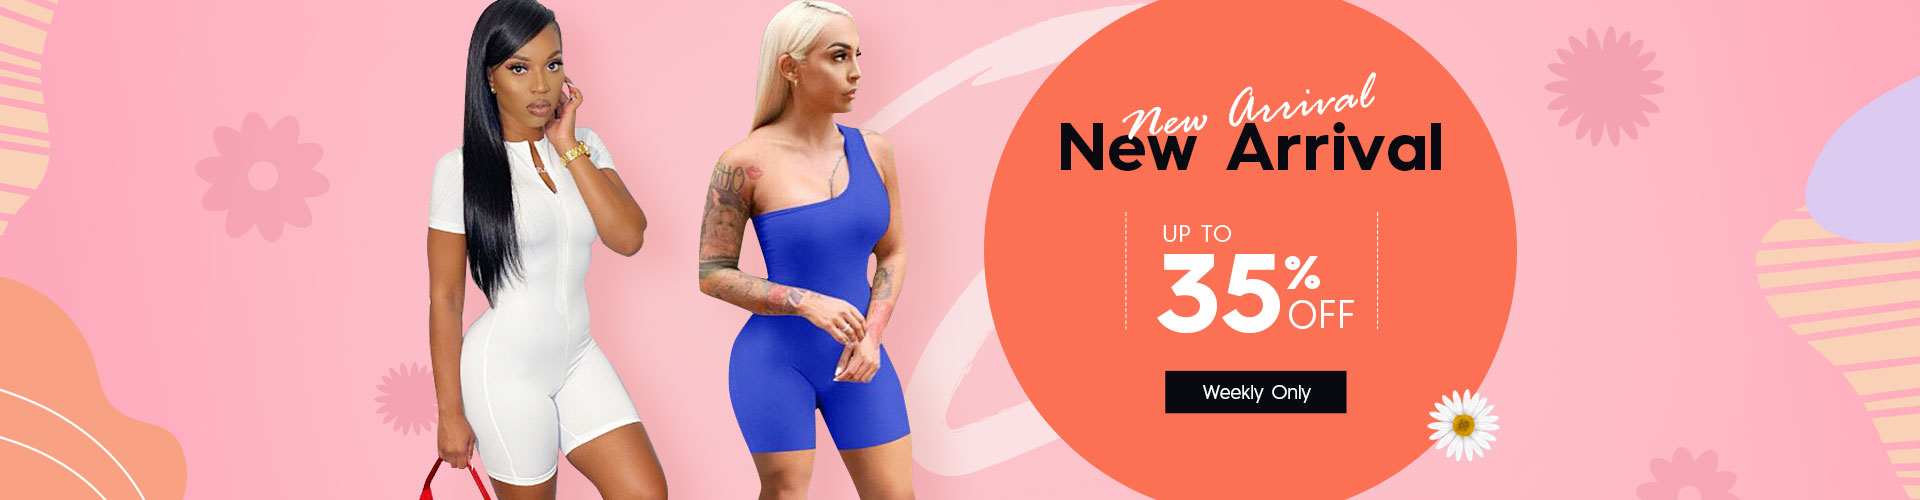 Women’s New Arrival Up To 35 Off At Wholesale7 Wholesale7 Blog